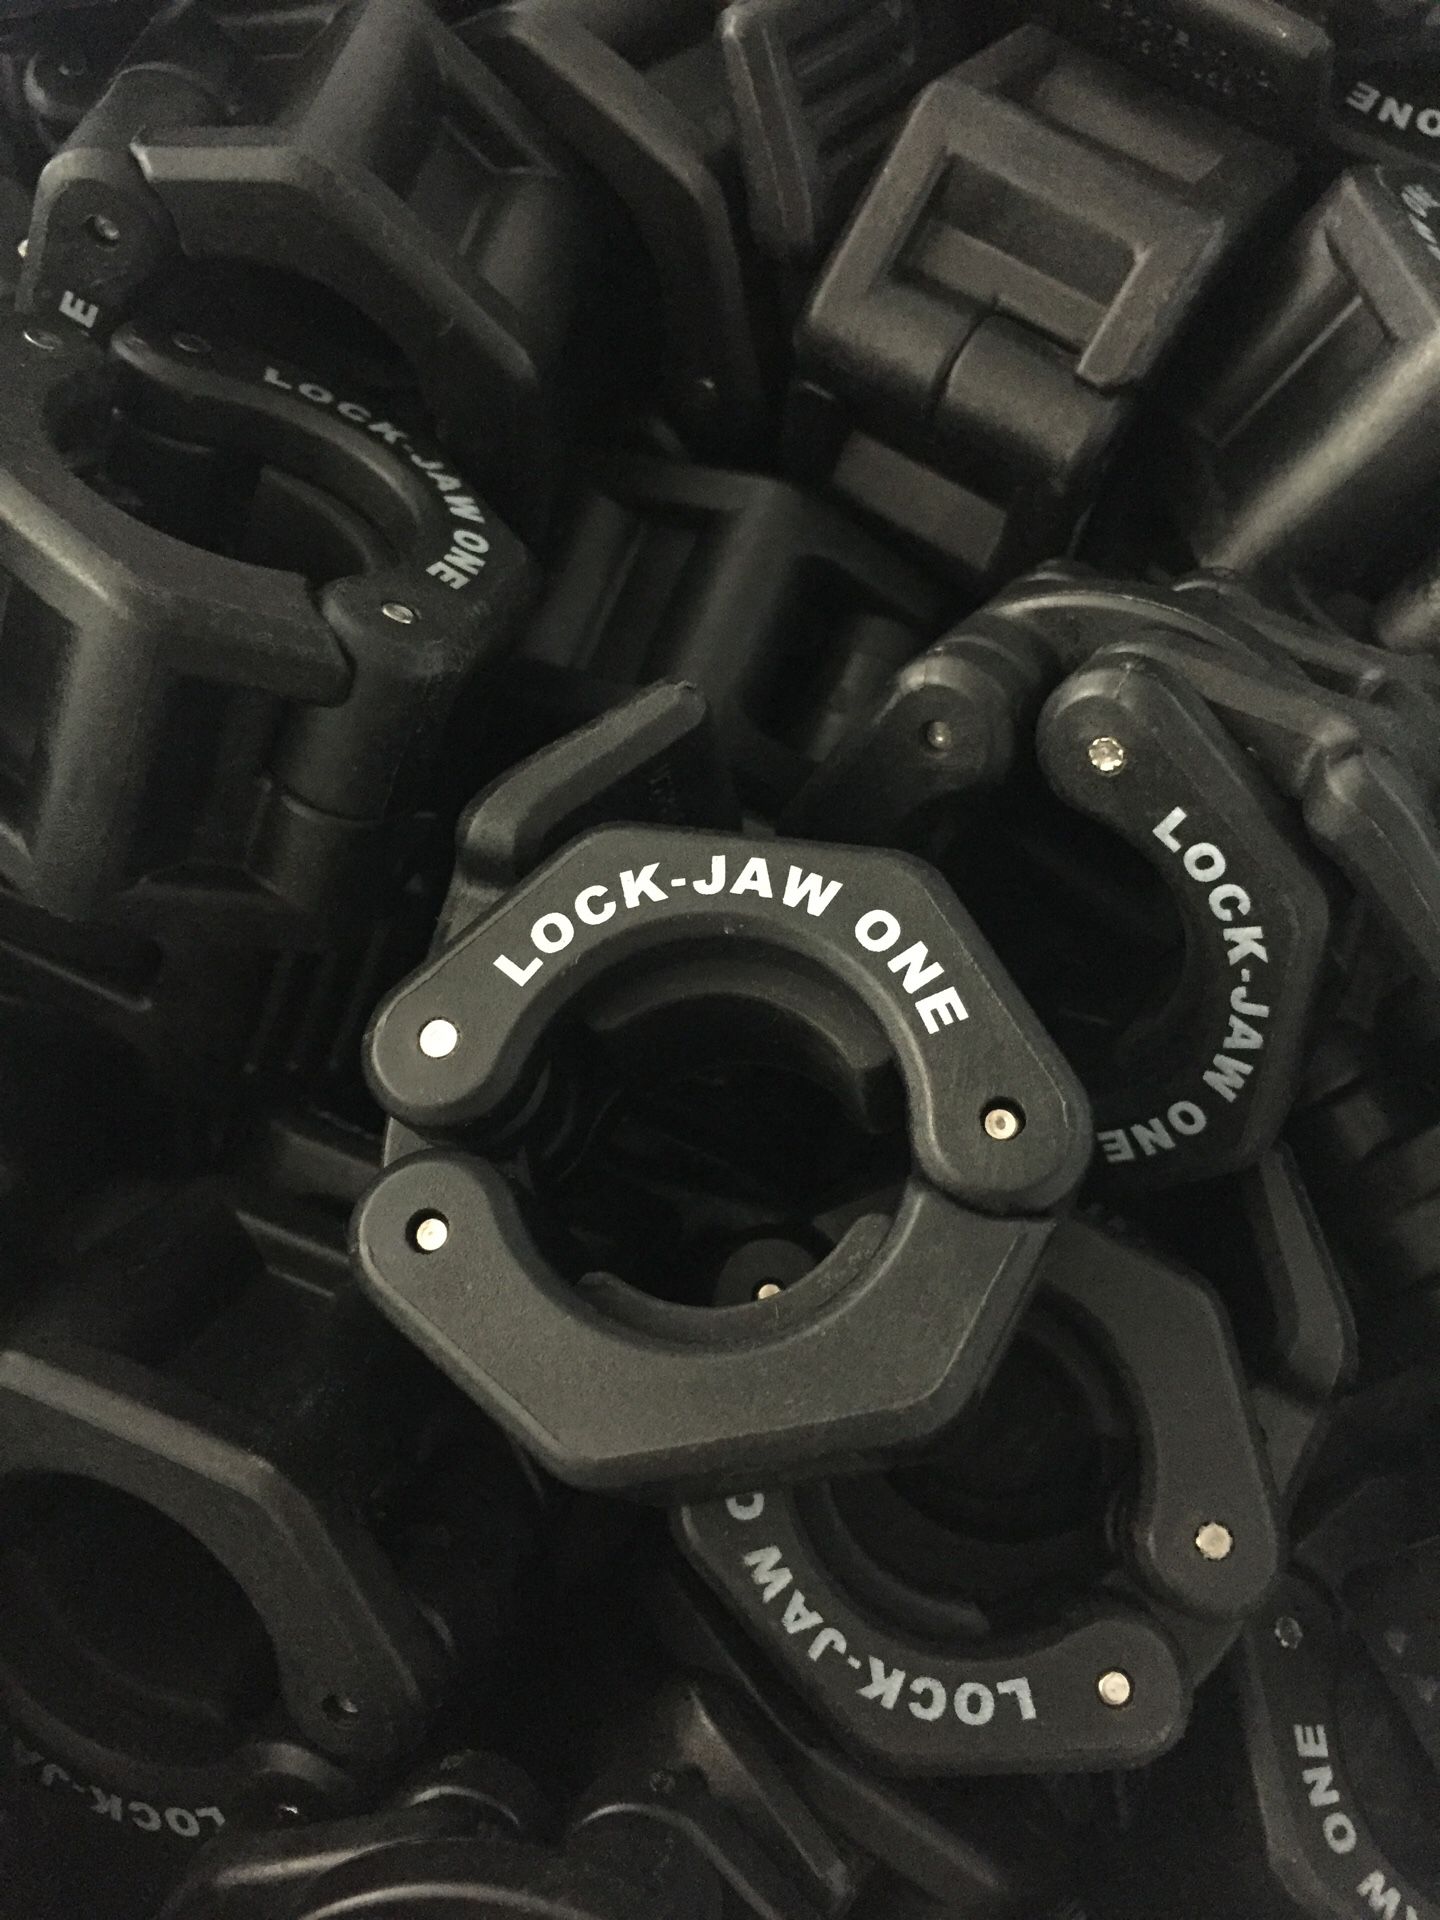 Lock Jaw One - Safety Collars for Standard 1” barbells and dumbbell handles, Retails for $32